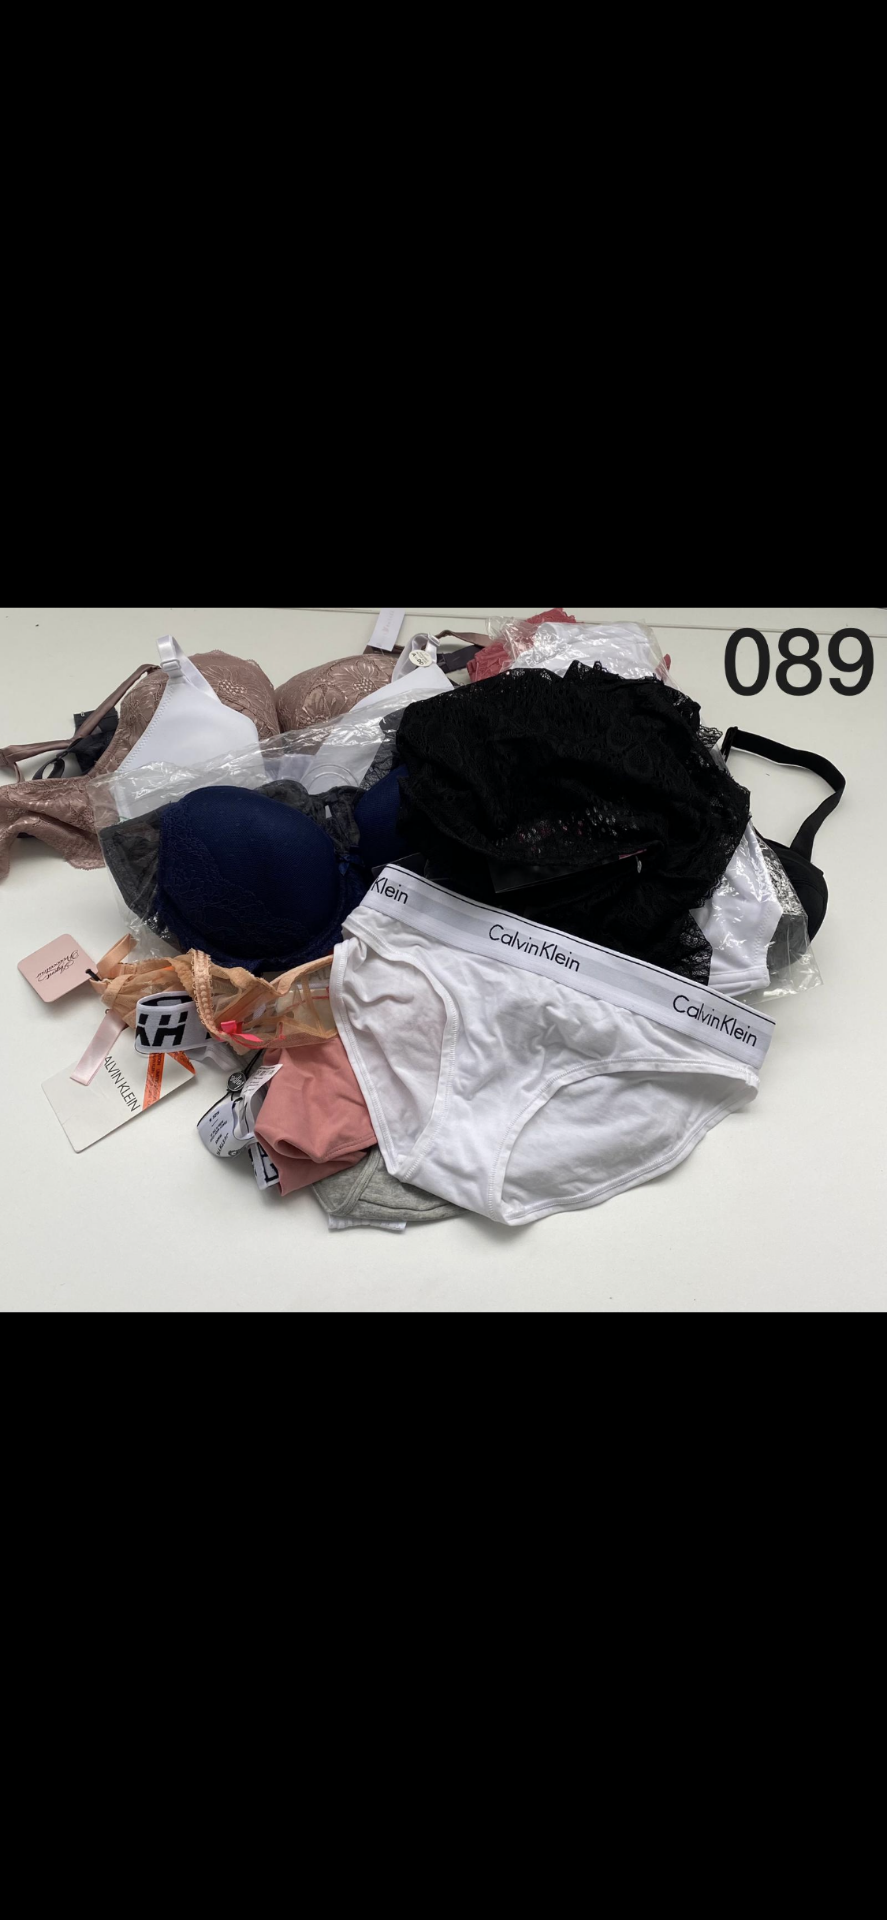 15 PIECE MIXED UNDERWEAR LOT IN VARIOUS SIZES INCLUDING SLOGGI, AGENT PROVOCATEUR AND CALVIN KLEIN